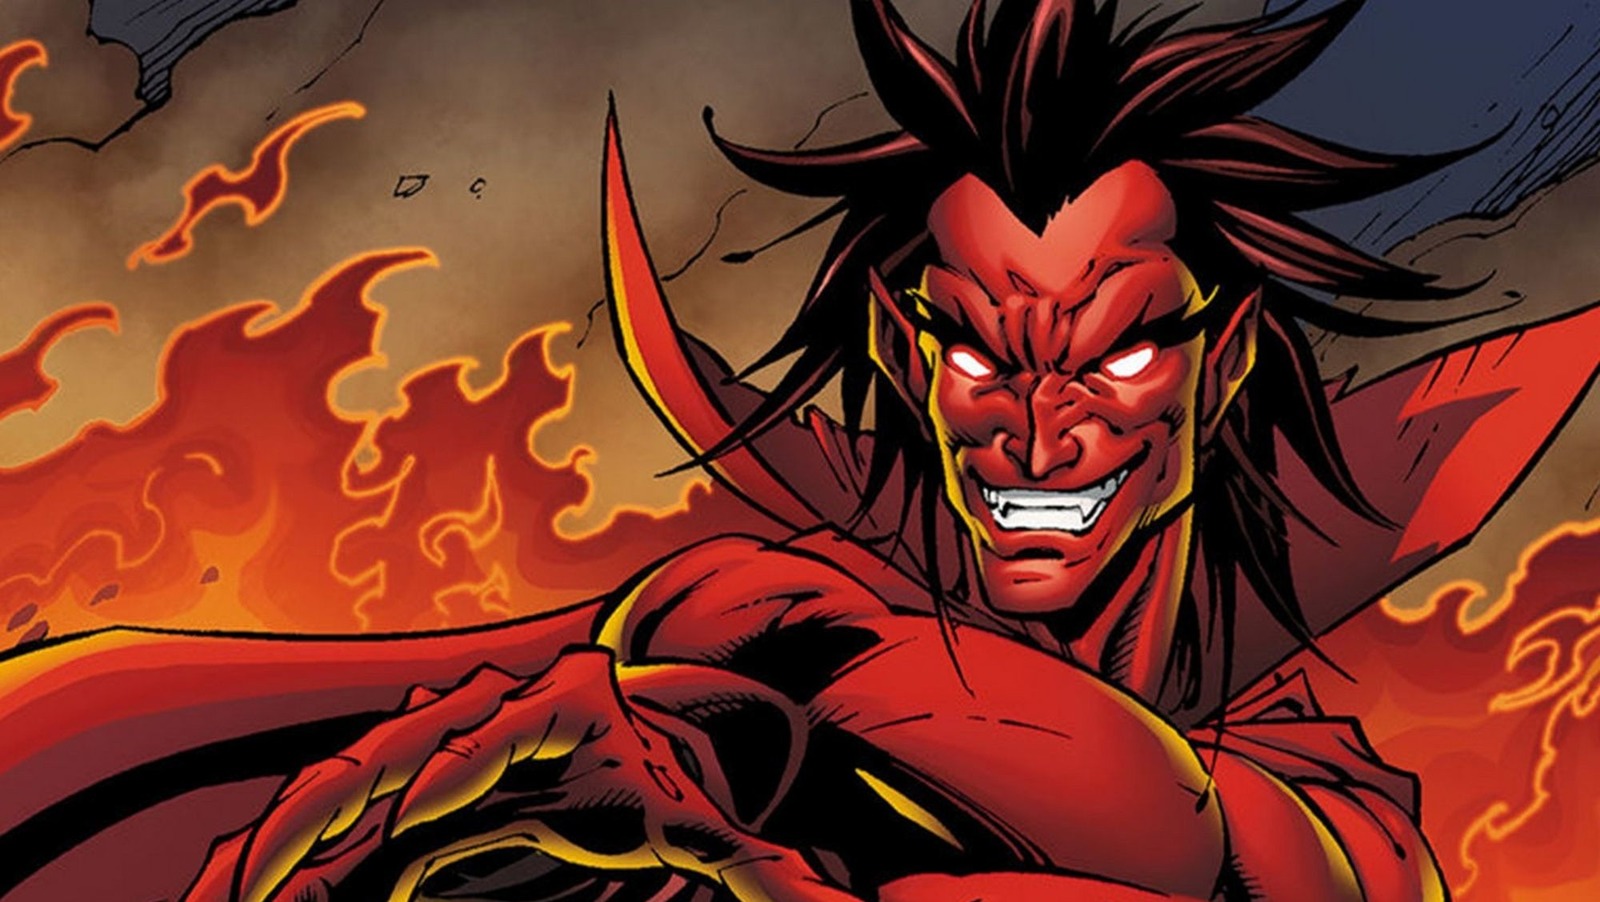 3. Call to Mephisto by Wanda In the comics, Wanda creates Tommy and Bill Maximoff's souls using slivers of Mephisto's essence. Towards the end of WandaVision, she hears the voice of her kids, who were presumed dead. Wanda might unleash the devil on Earth in hopes of saving her kid. Marvel Comics